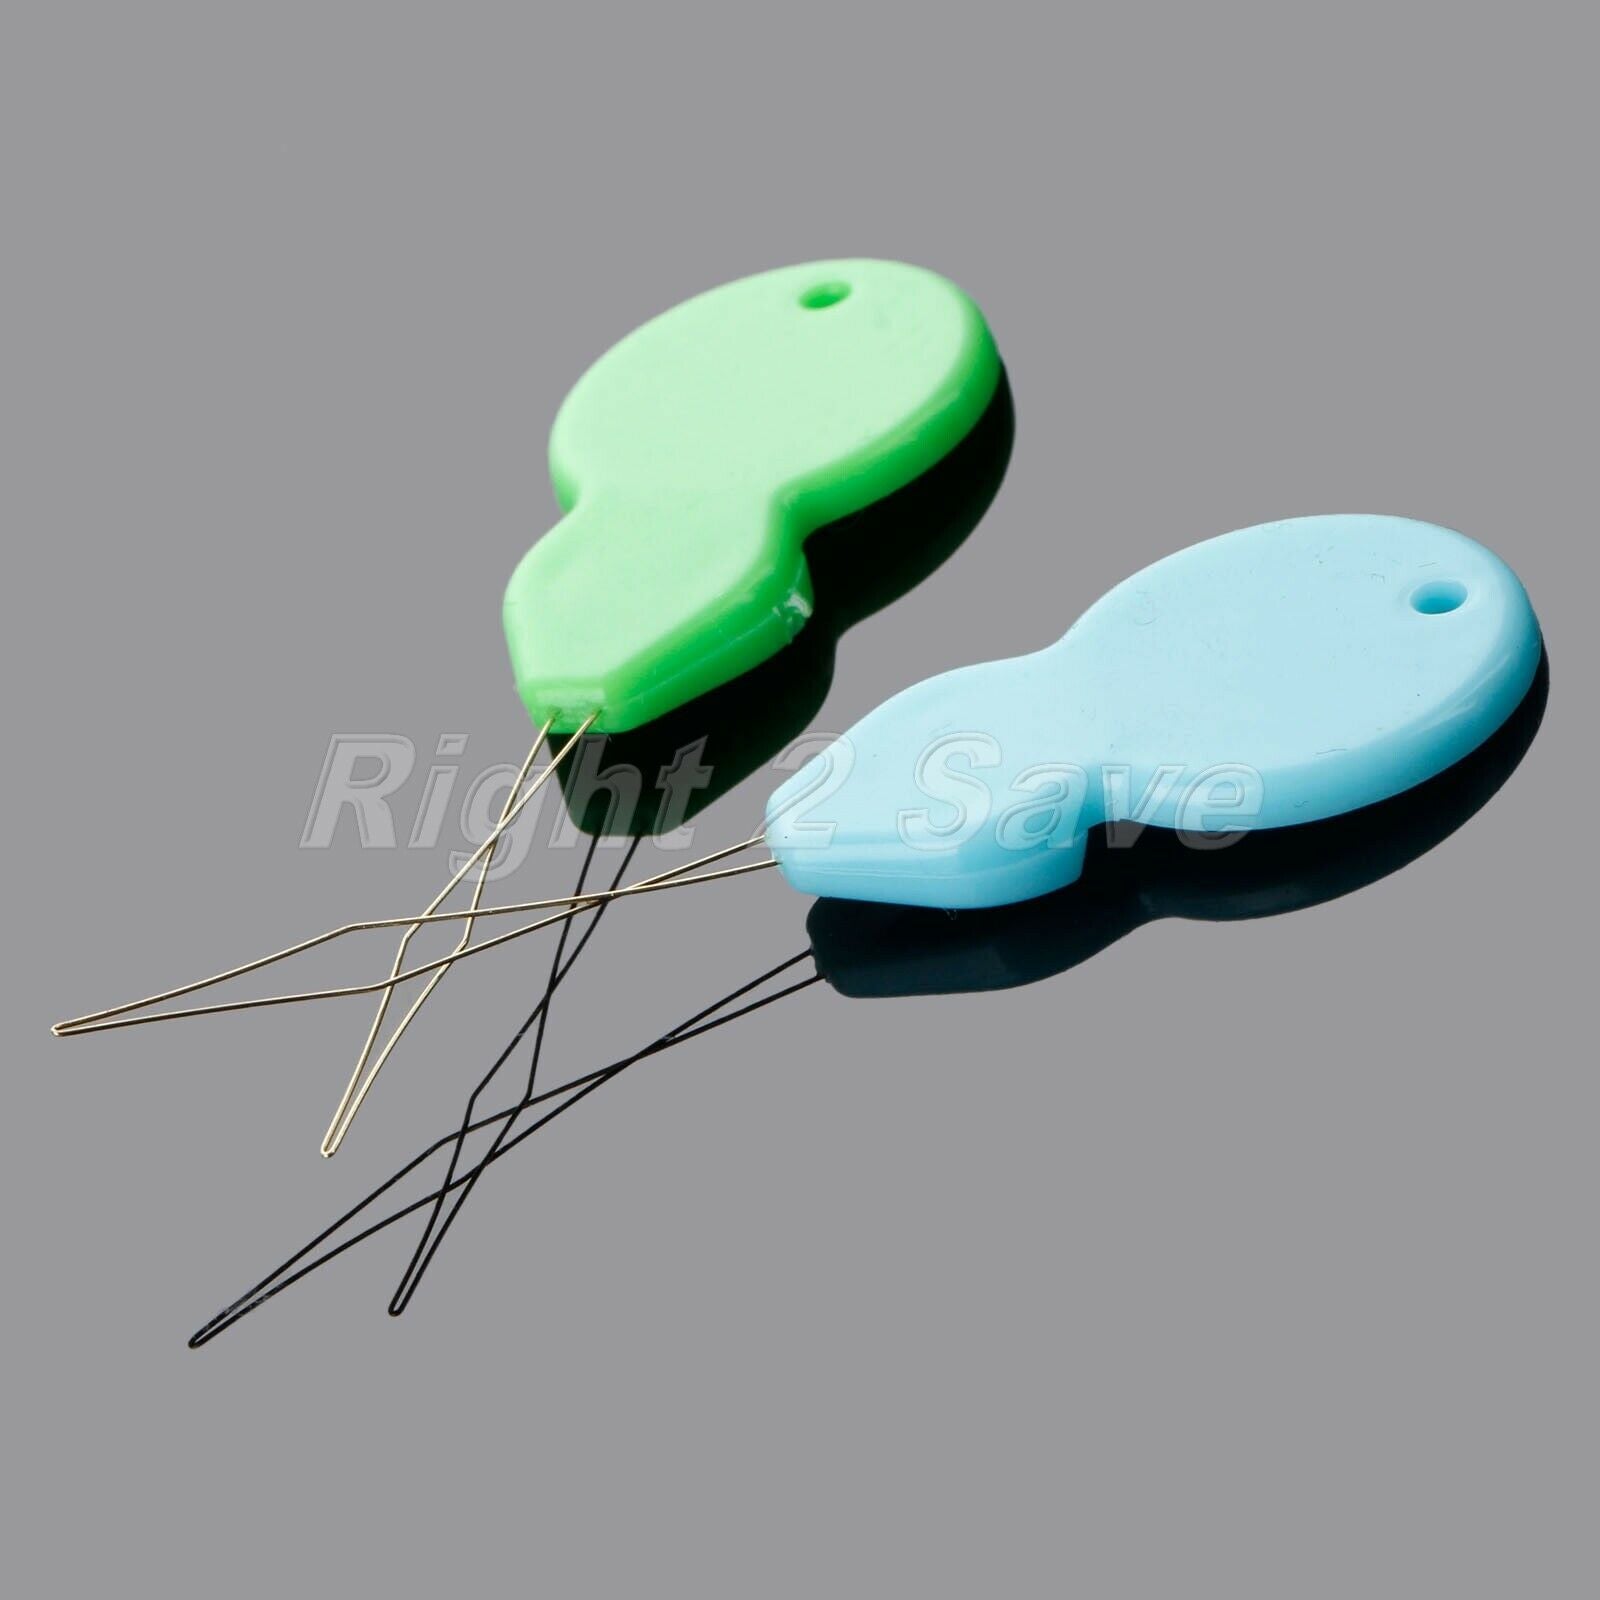 10pcs Needle Threaders Cross Stitch Sewing Handwork Wire Punch Insertion Tools